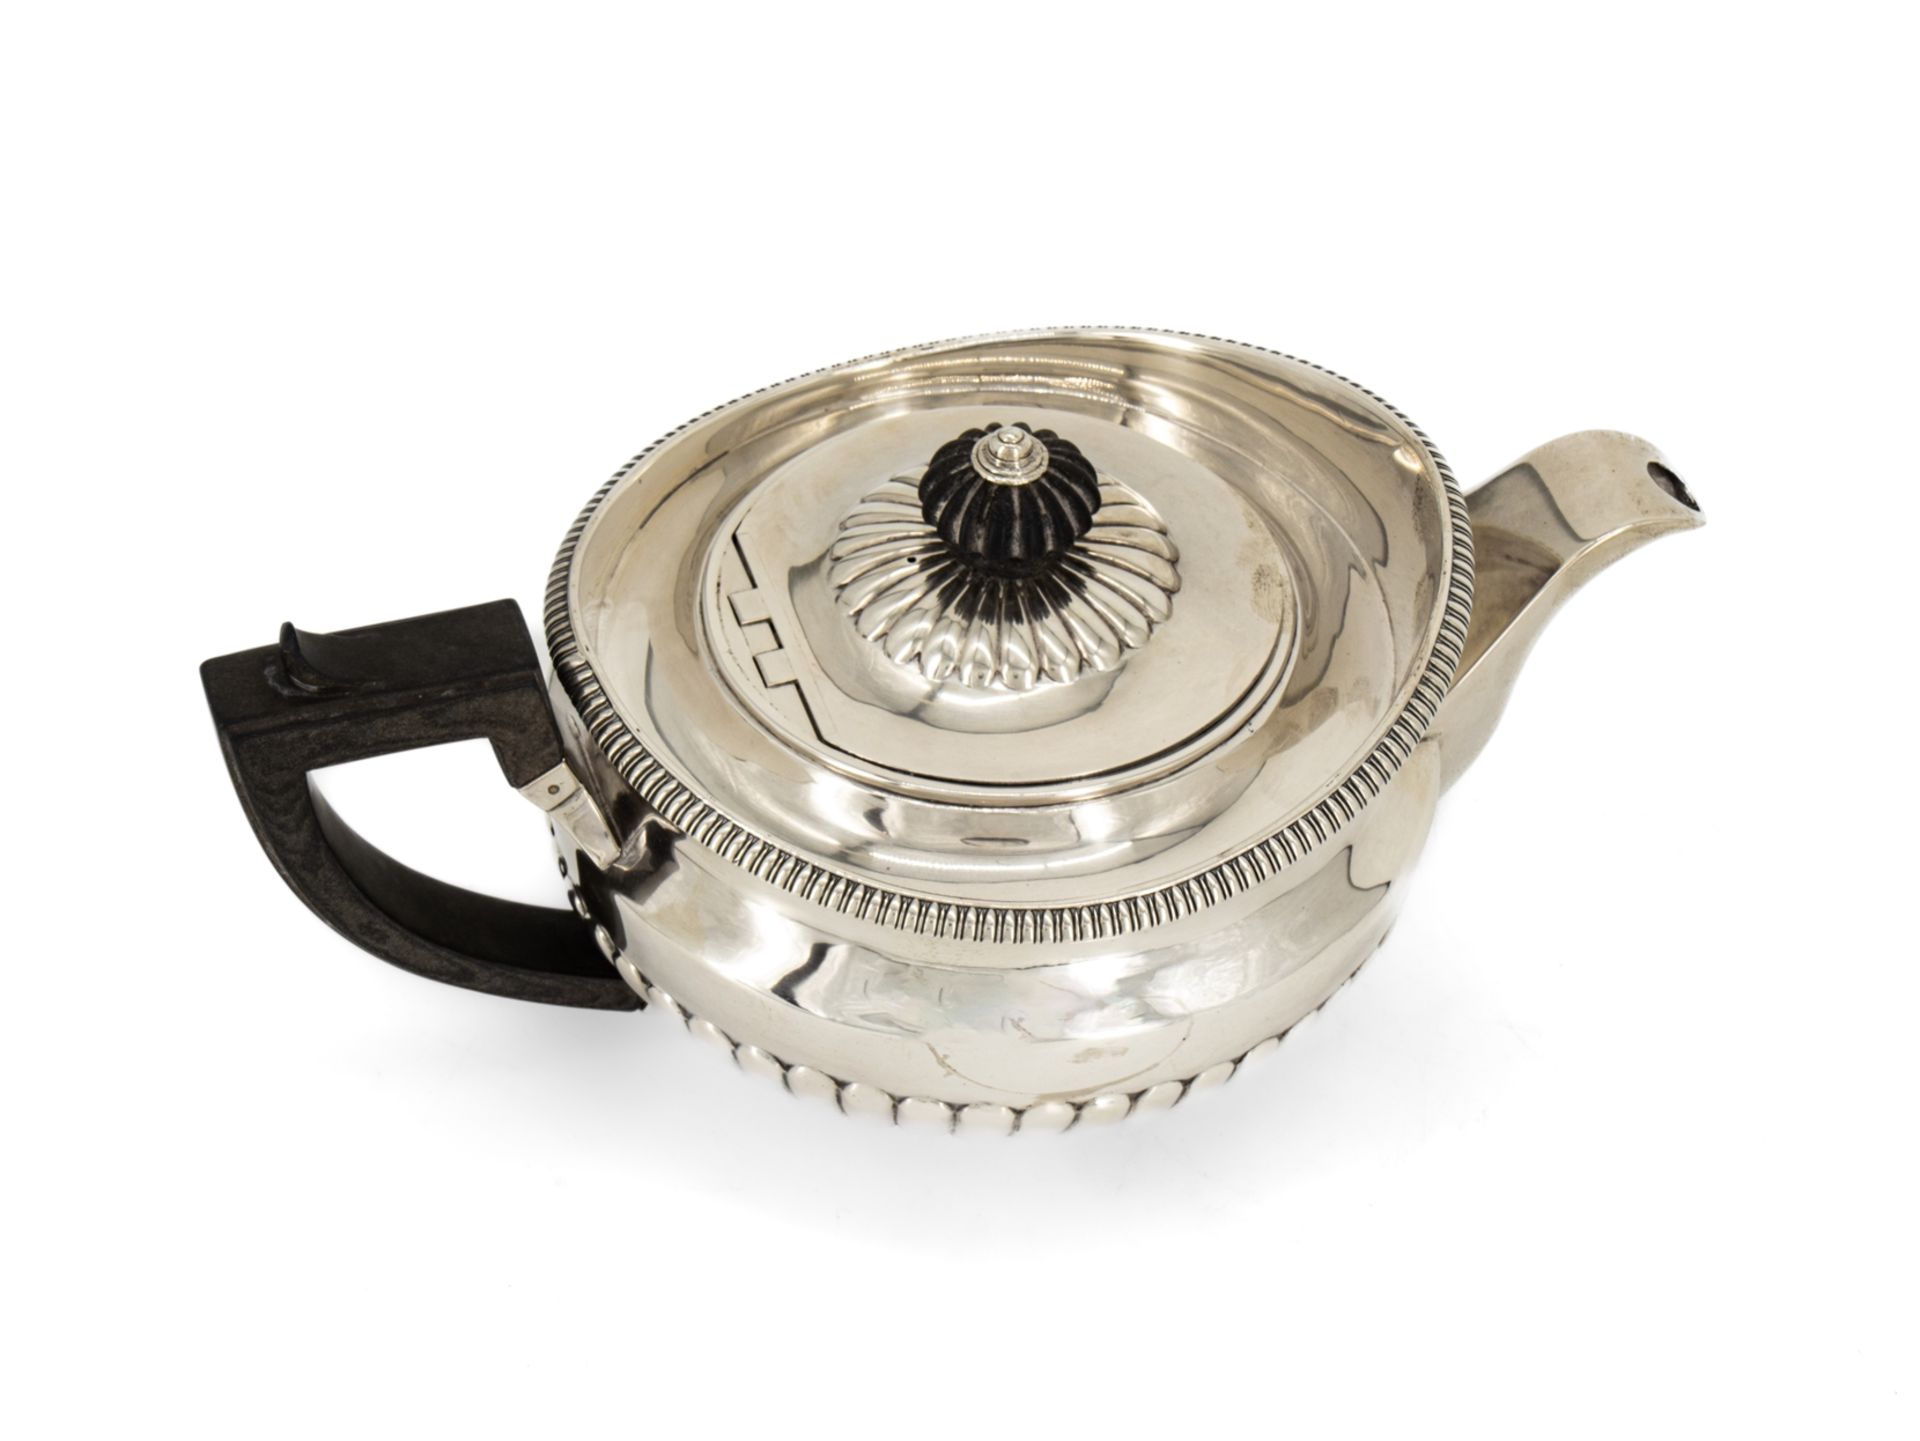 Large sterling silver teapot, England, London, 1830 - Image 3 of 5